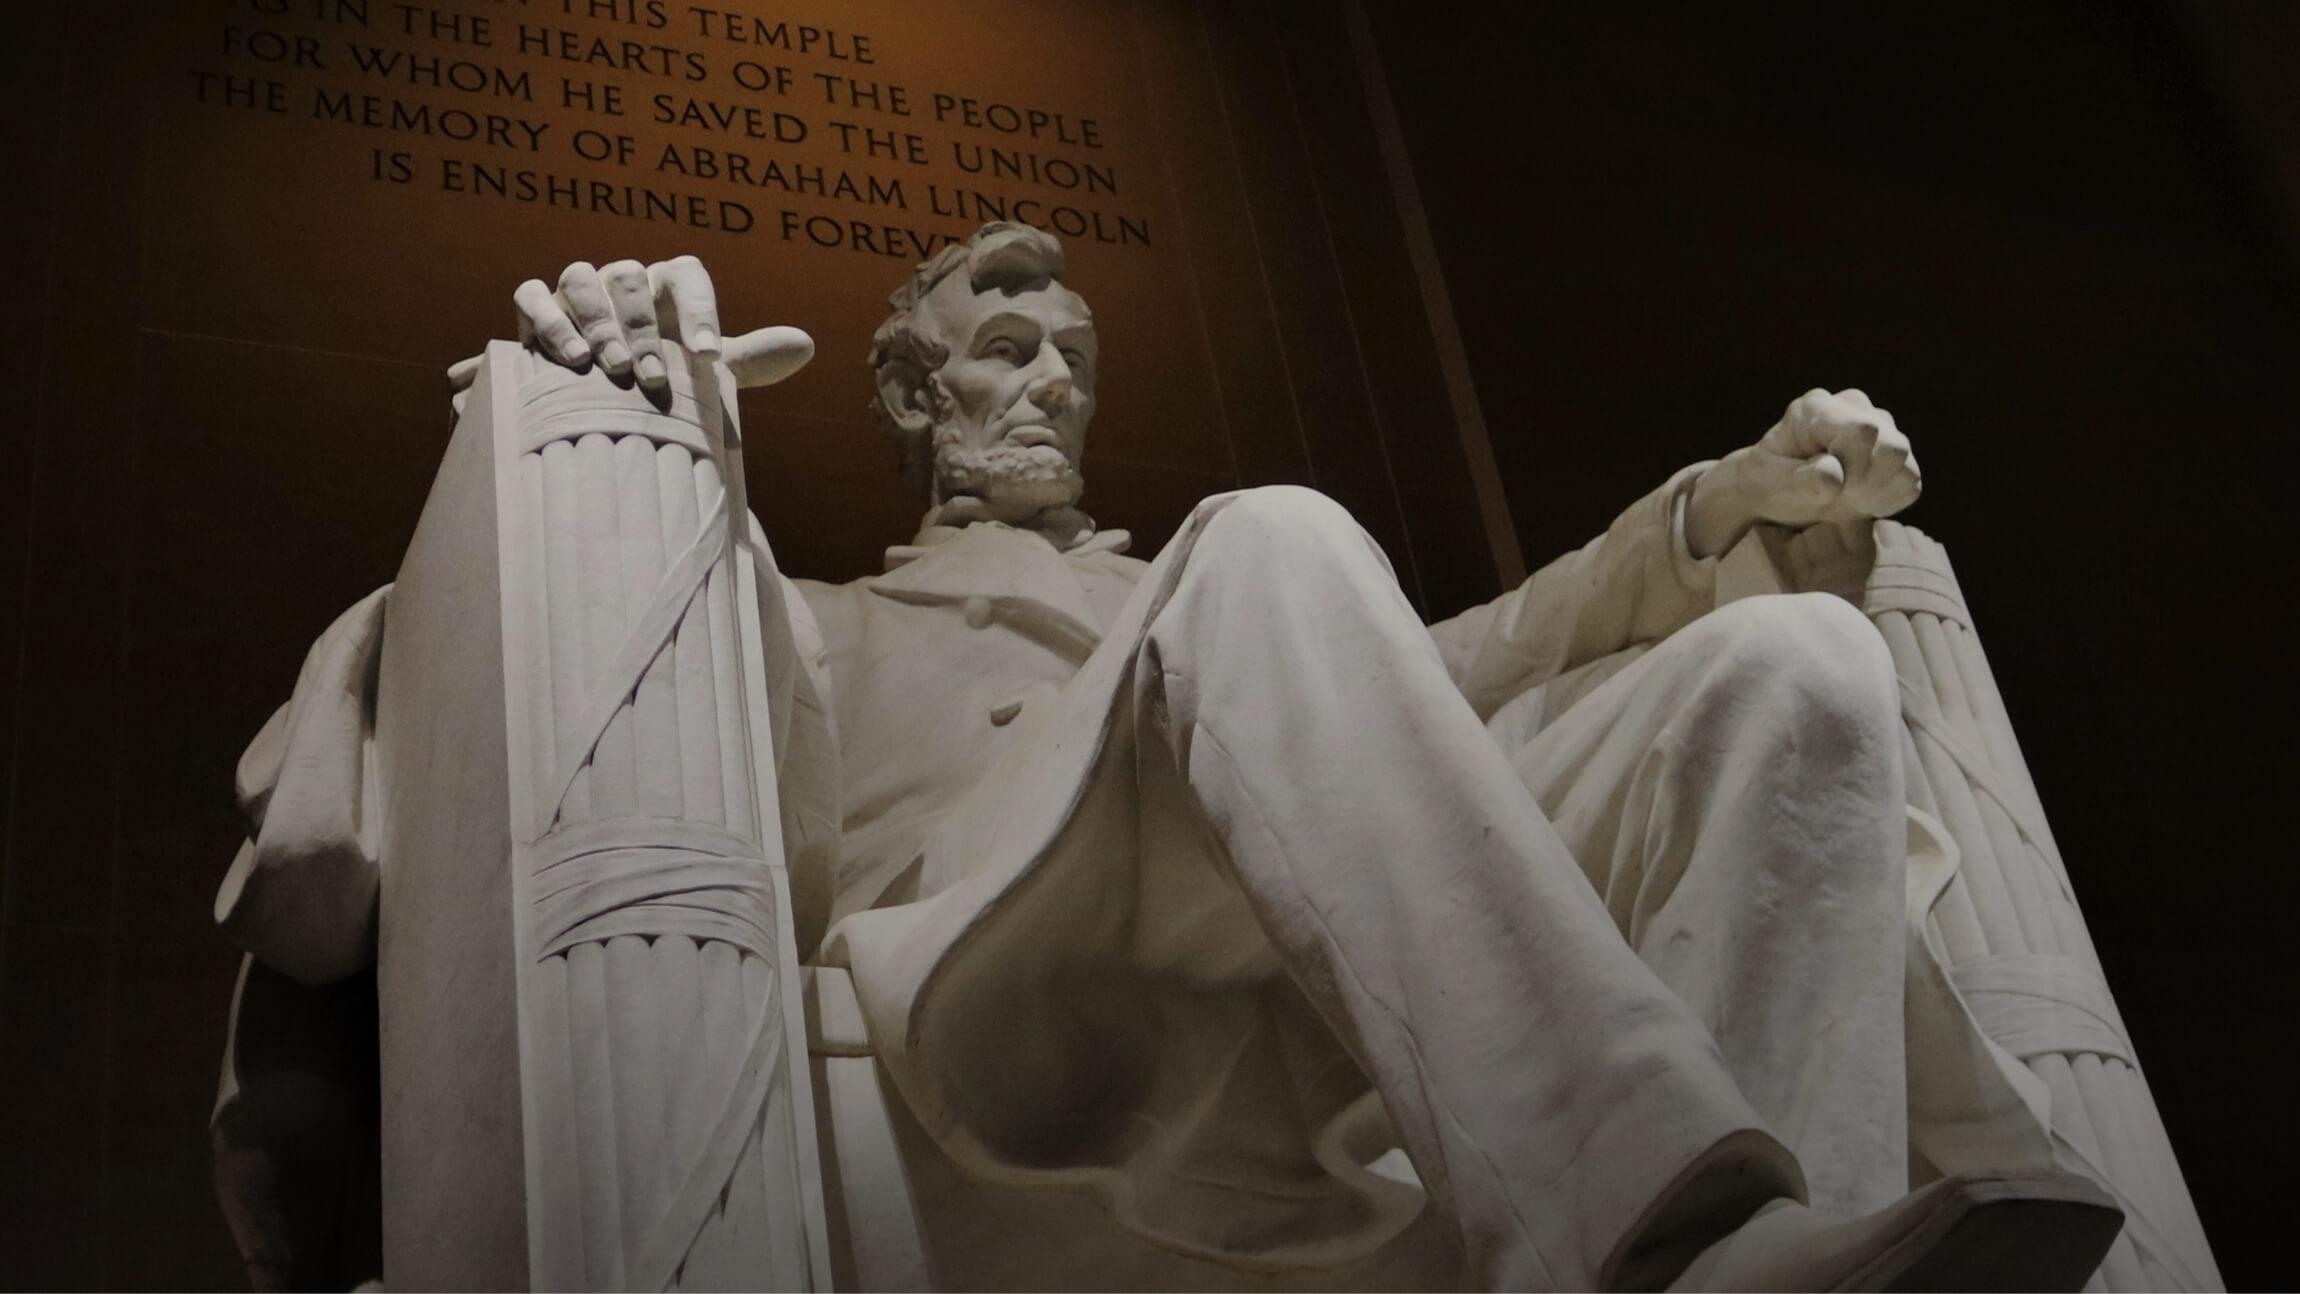 Photo of the Lincoln Memorial